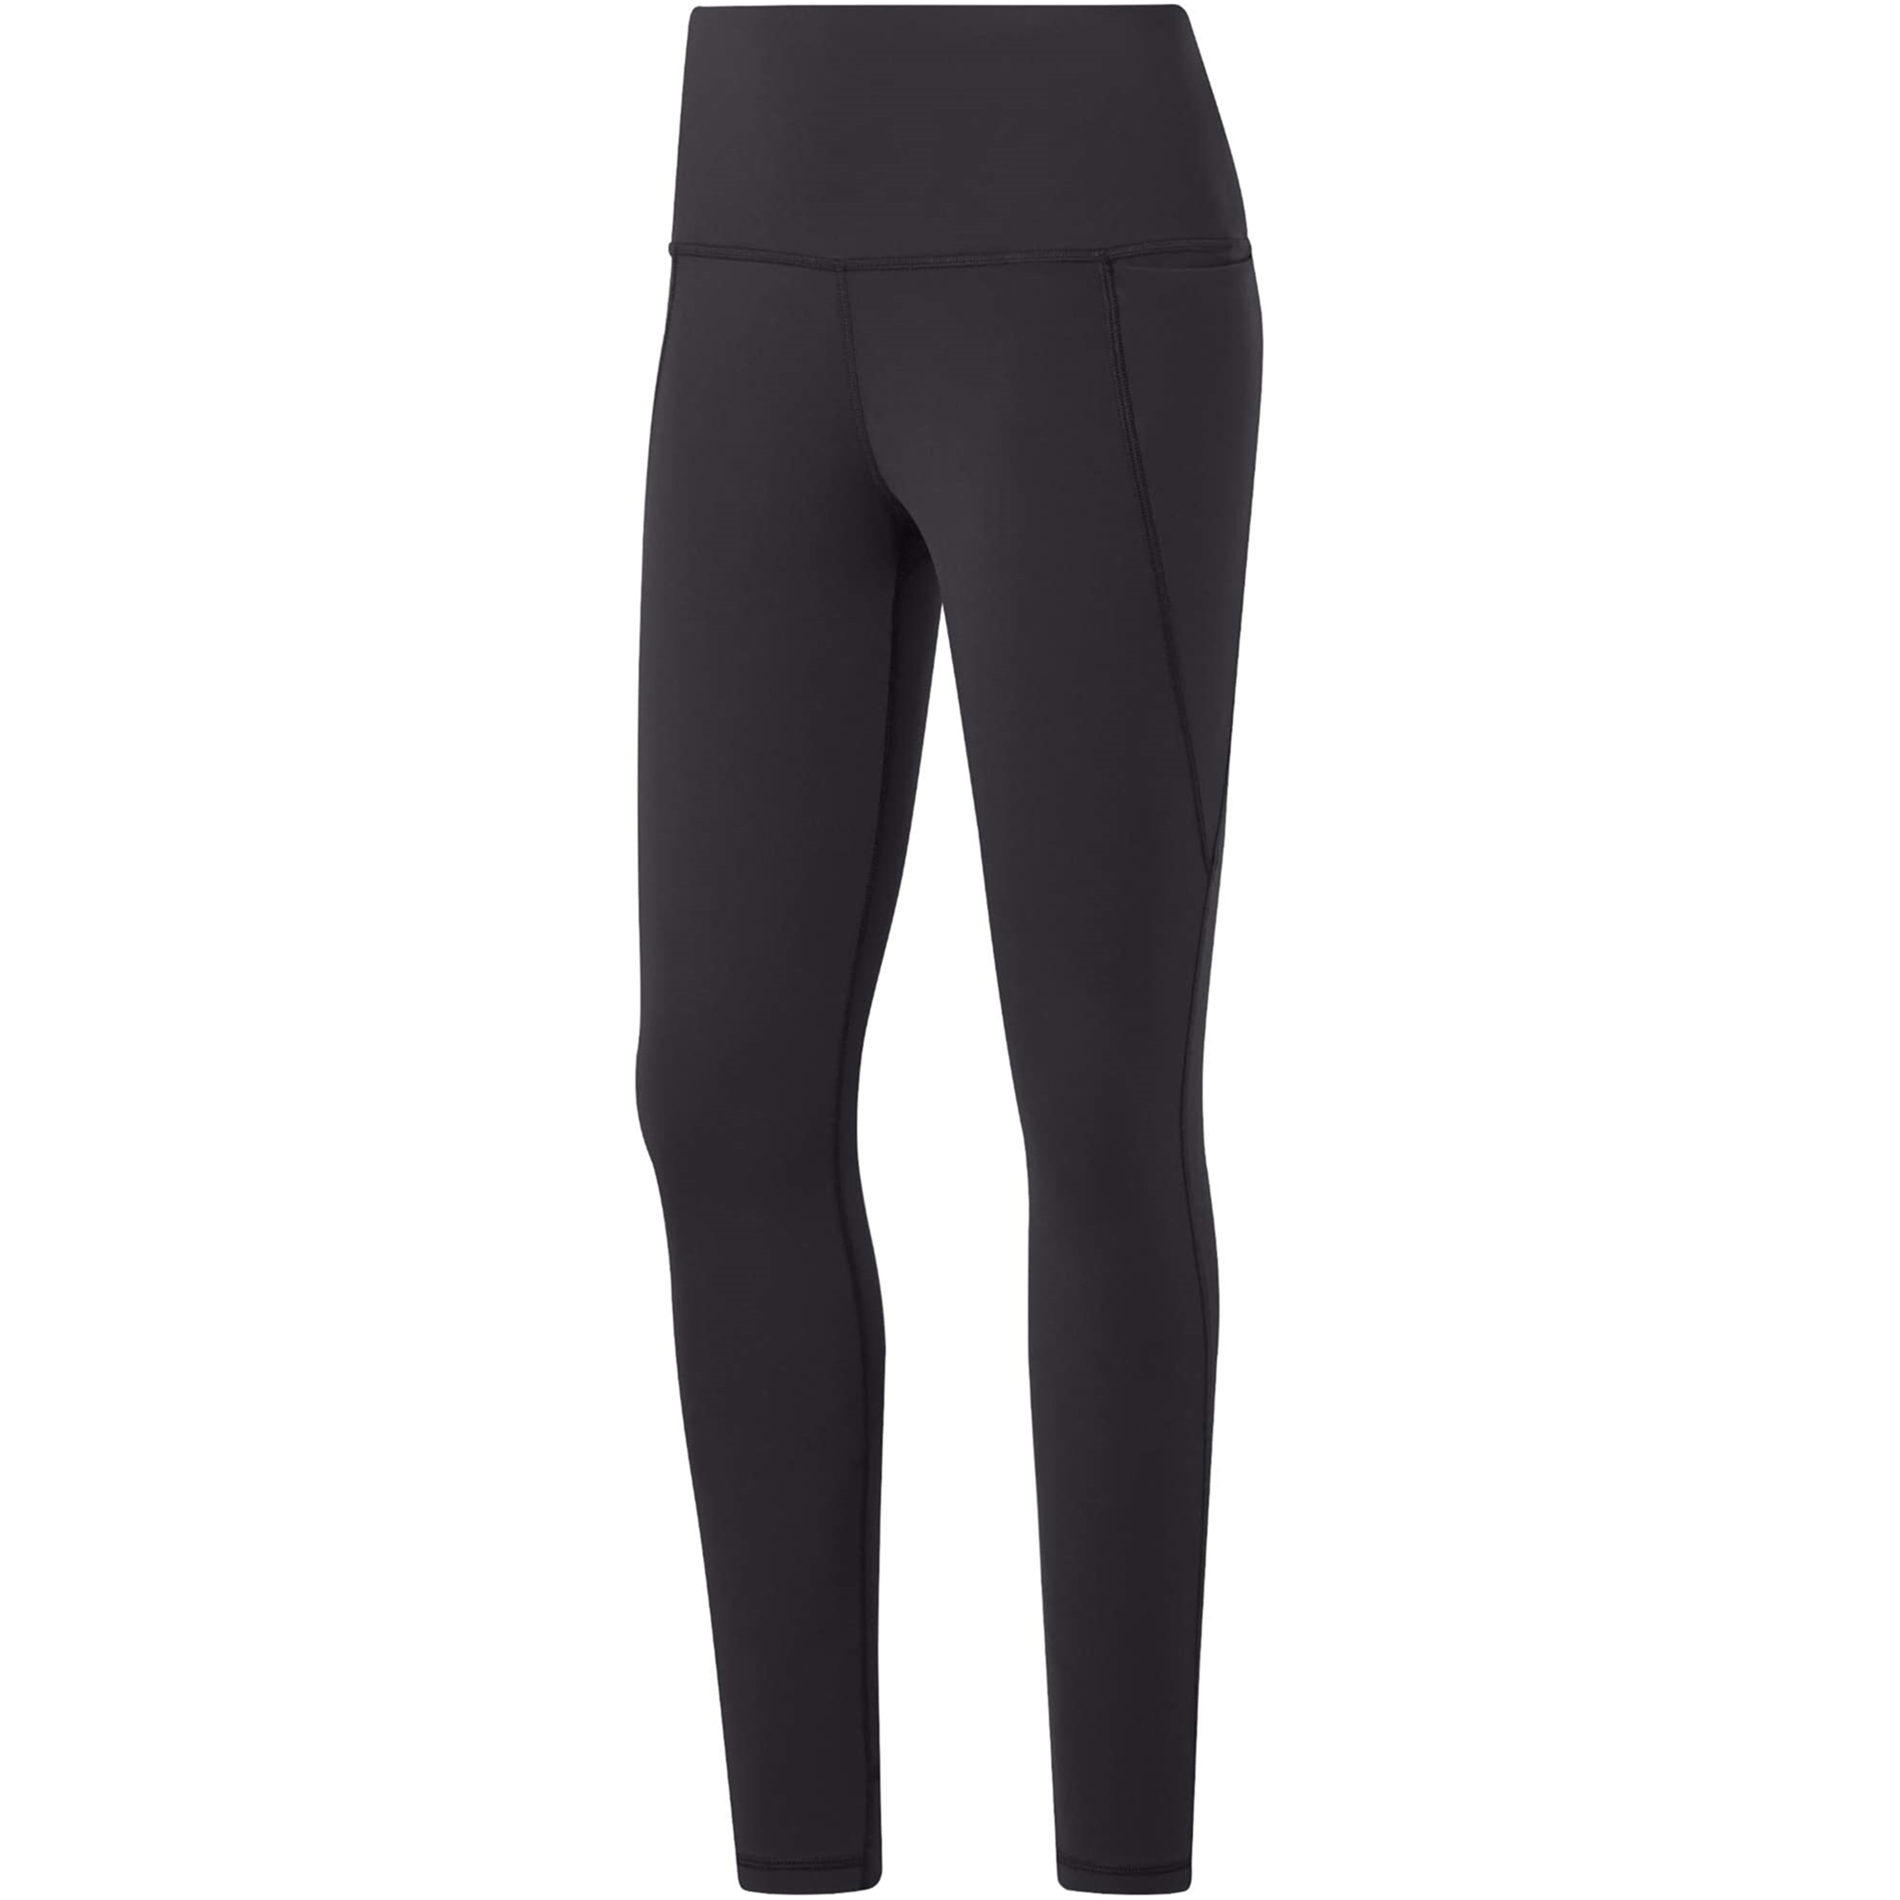 Reebok Womens Lux 7/8 High Rise Tight Compression Athletic Pants